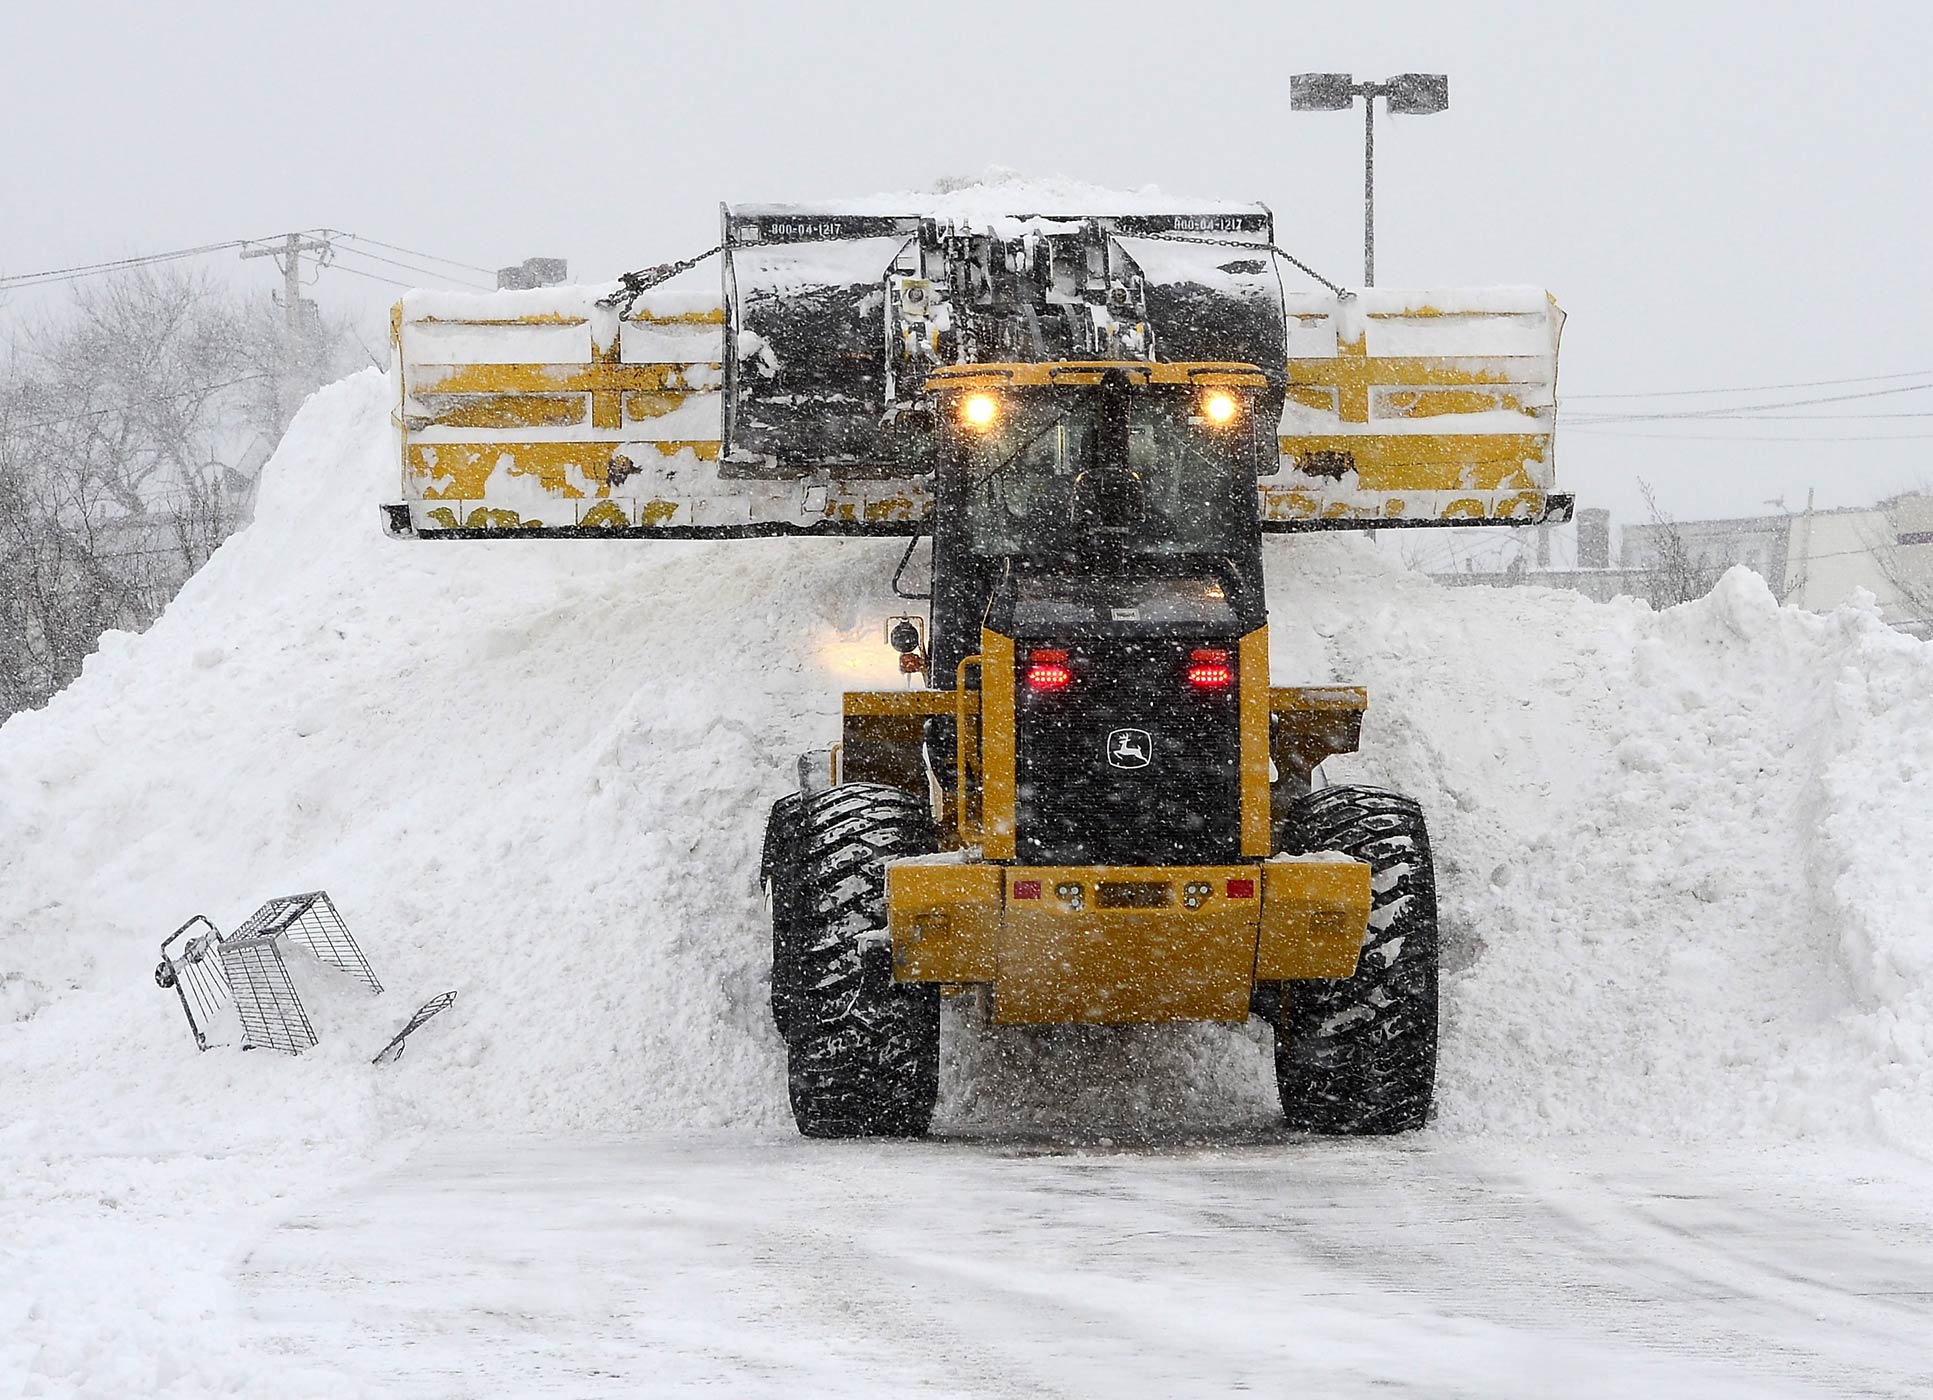 Second major winter storm in a week to hit Boston